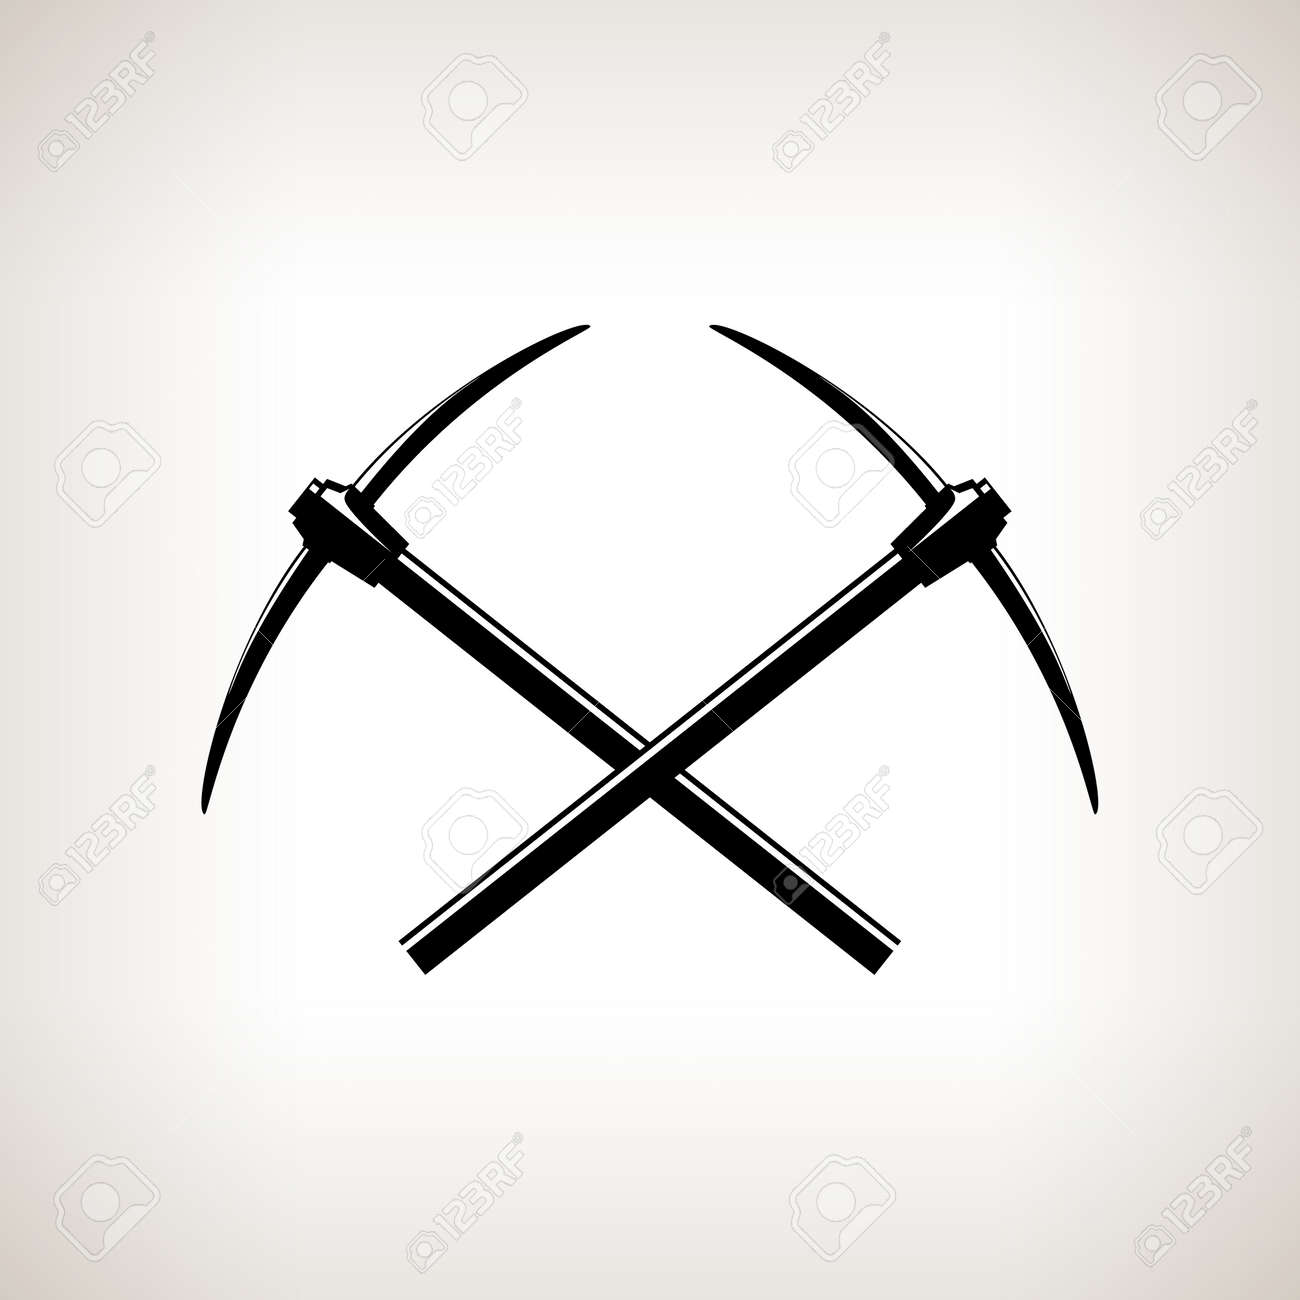 39076739-Silhouettes-of-two-crossed-pickaxes-on-a-light-background-hand-tool-with-a-hard-head-attached-perpen-Stock-Vector.jpg